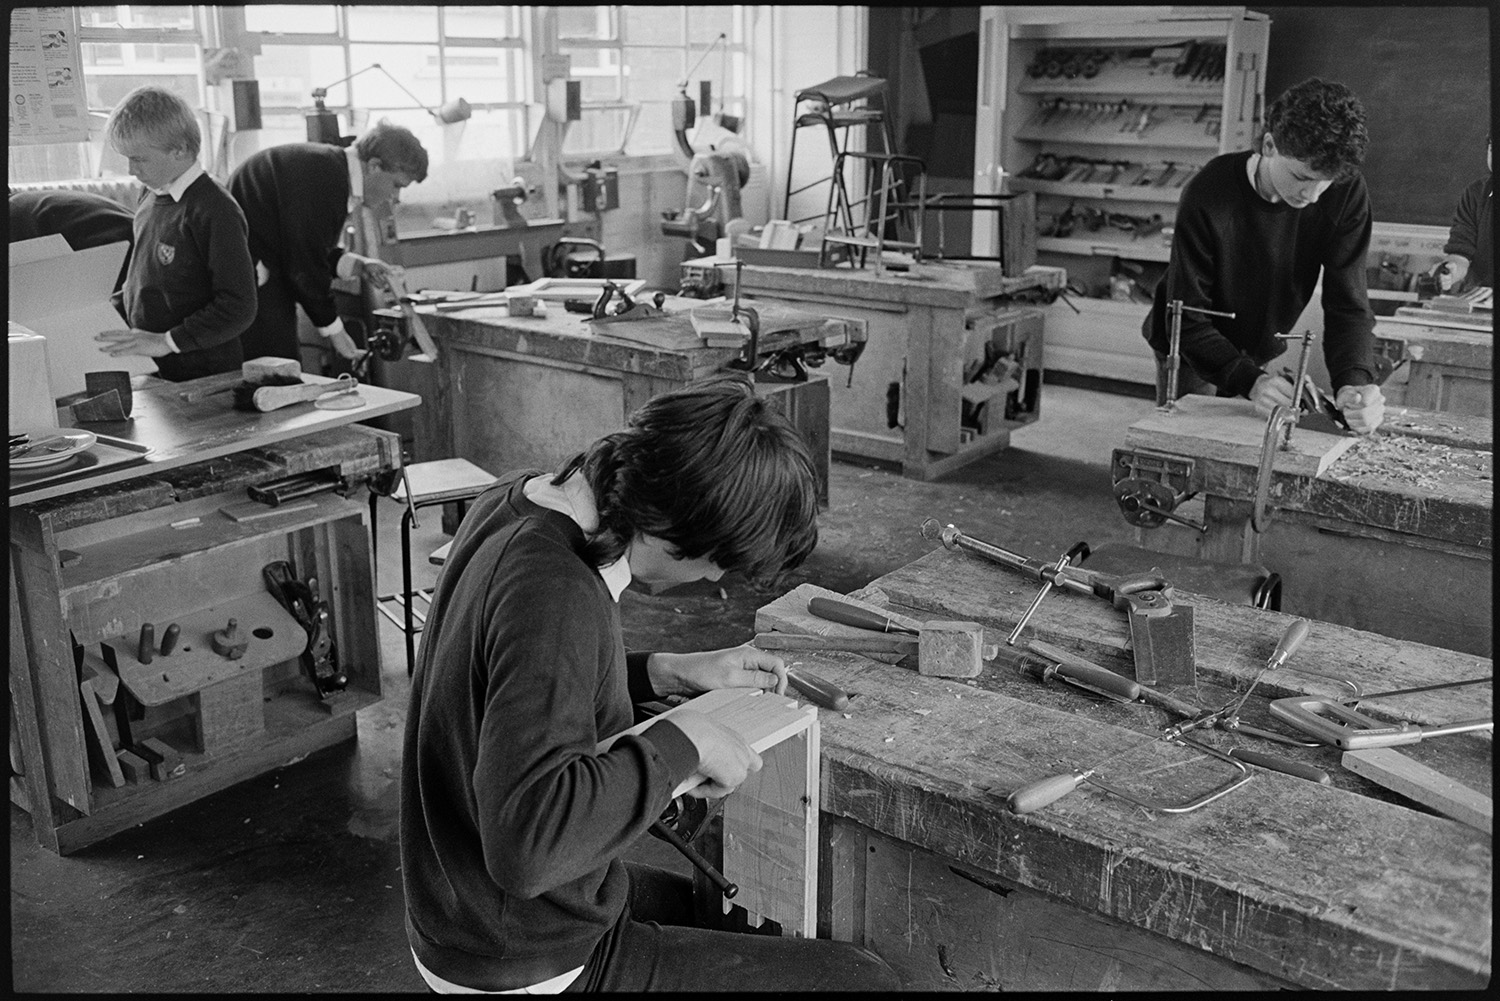 School lessons in classroom gymnastics, technology, craft, woodwork workshop.
[Woodworking class at Chulmleigh Community College. Four pupils are at benches working with tools including planes, clamps, saws, mallets and chisels. One pupil is planning a piece of wood which is clamped to the bench, and another is working on a piece with dovetail joints.]